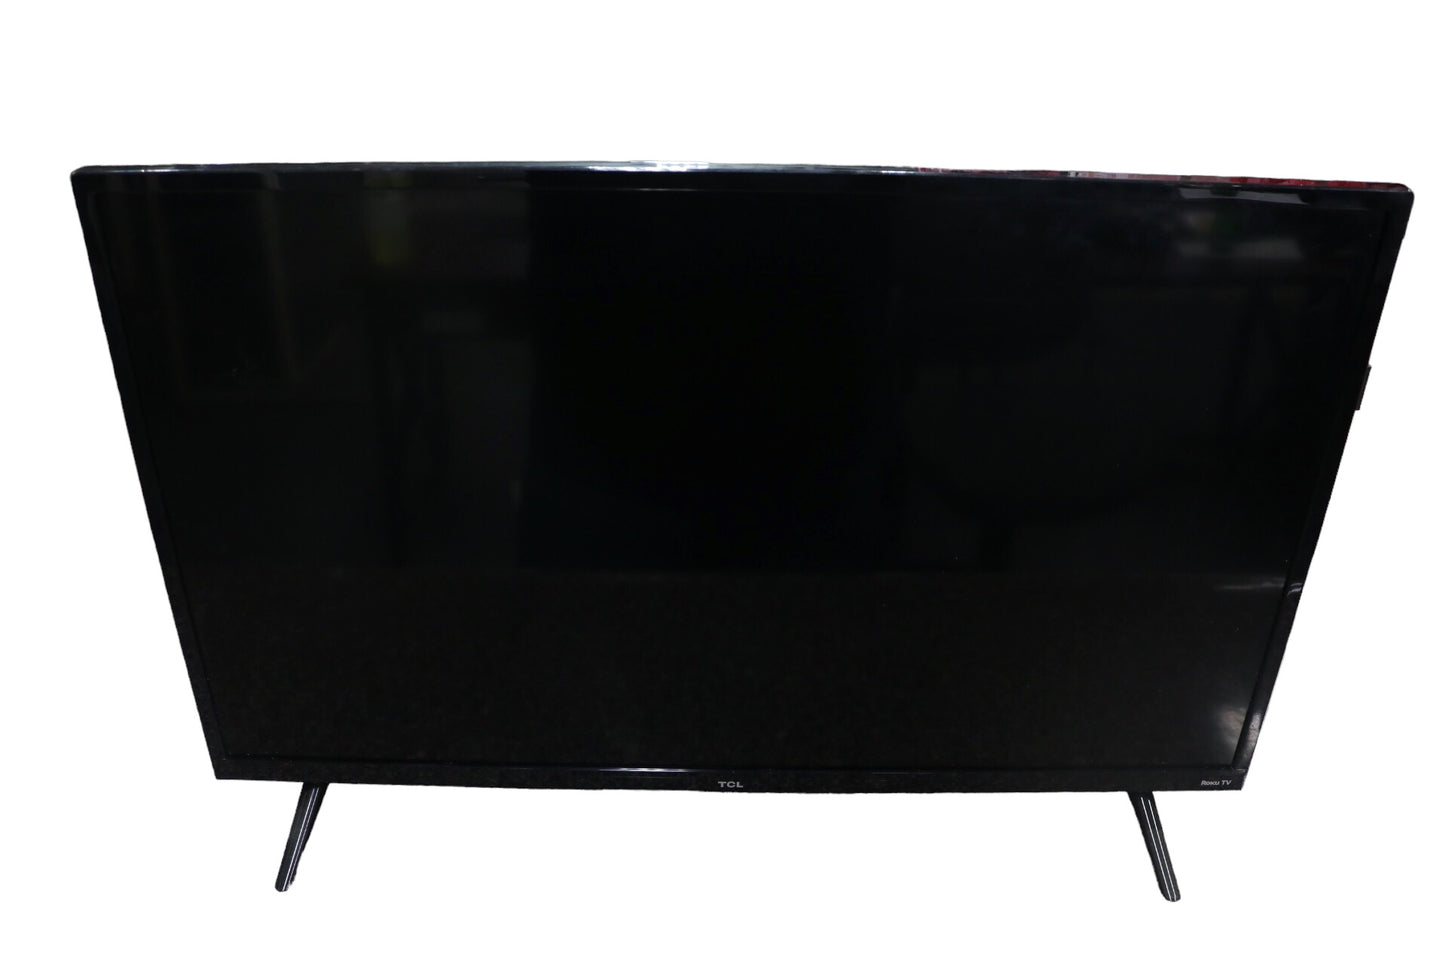 TCL 32 ” Inch HD LED SMART ROKU Black TV 32S331 (Local Pick-Up Only)